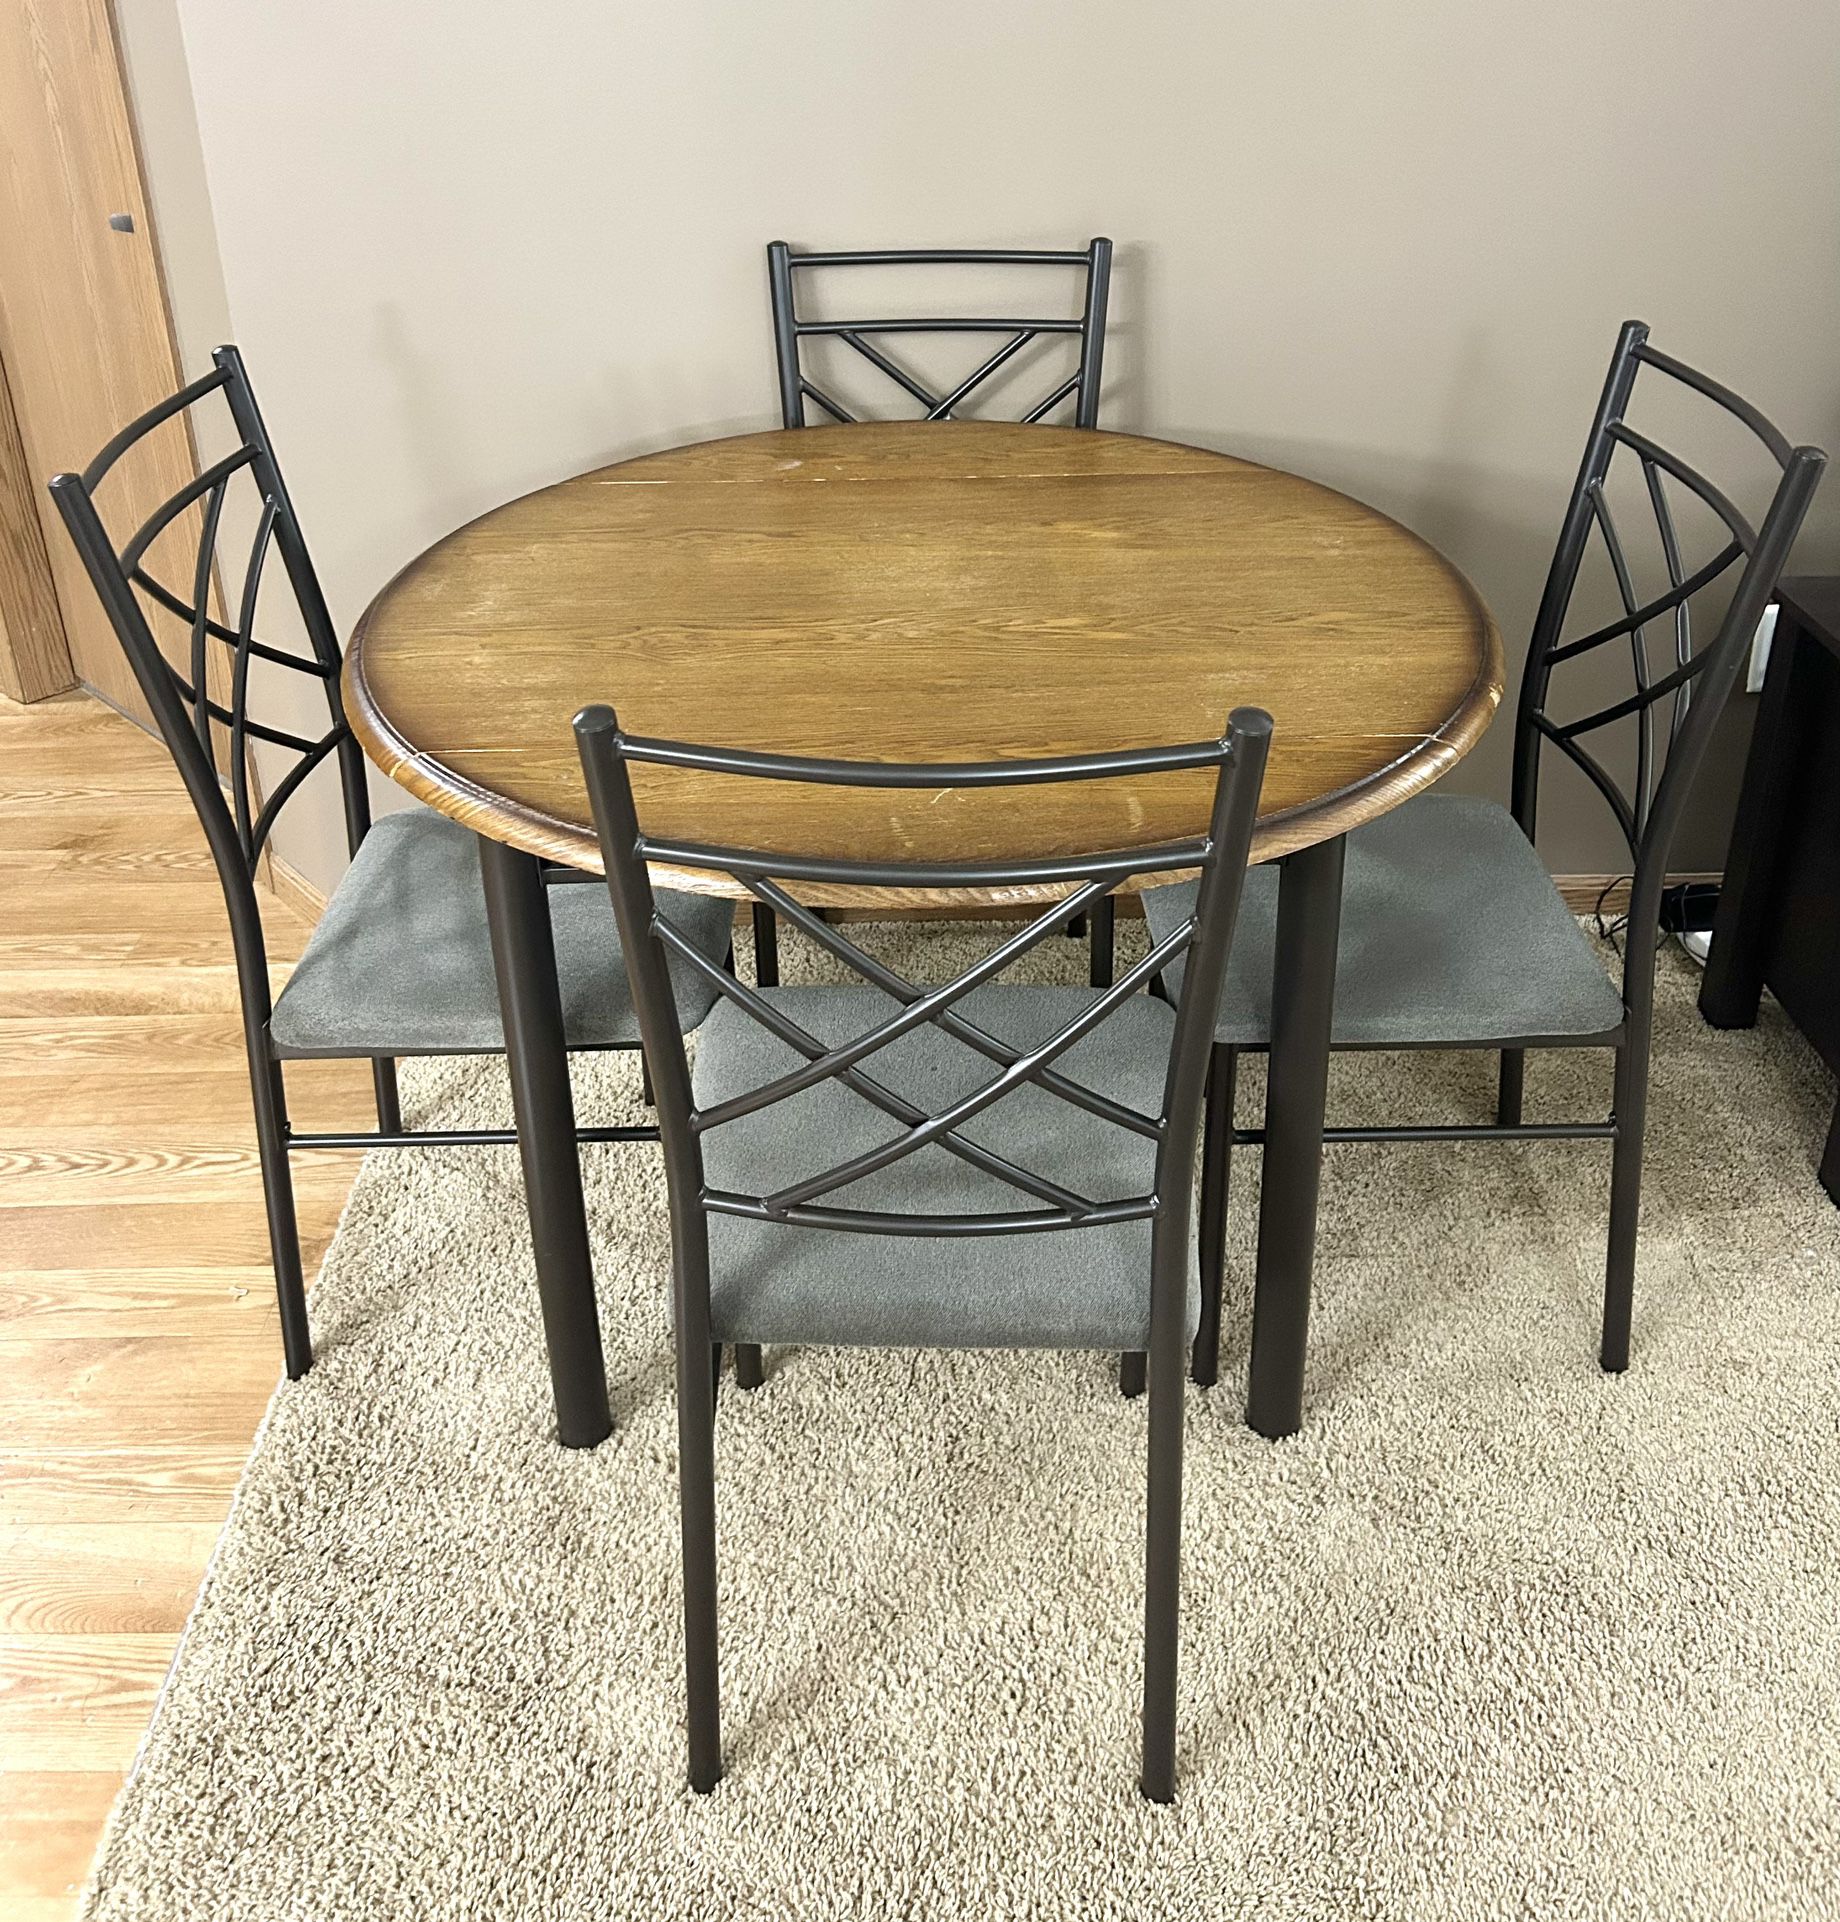 40” Double Drop-Leaf Round Table Set For 4